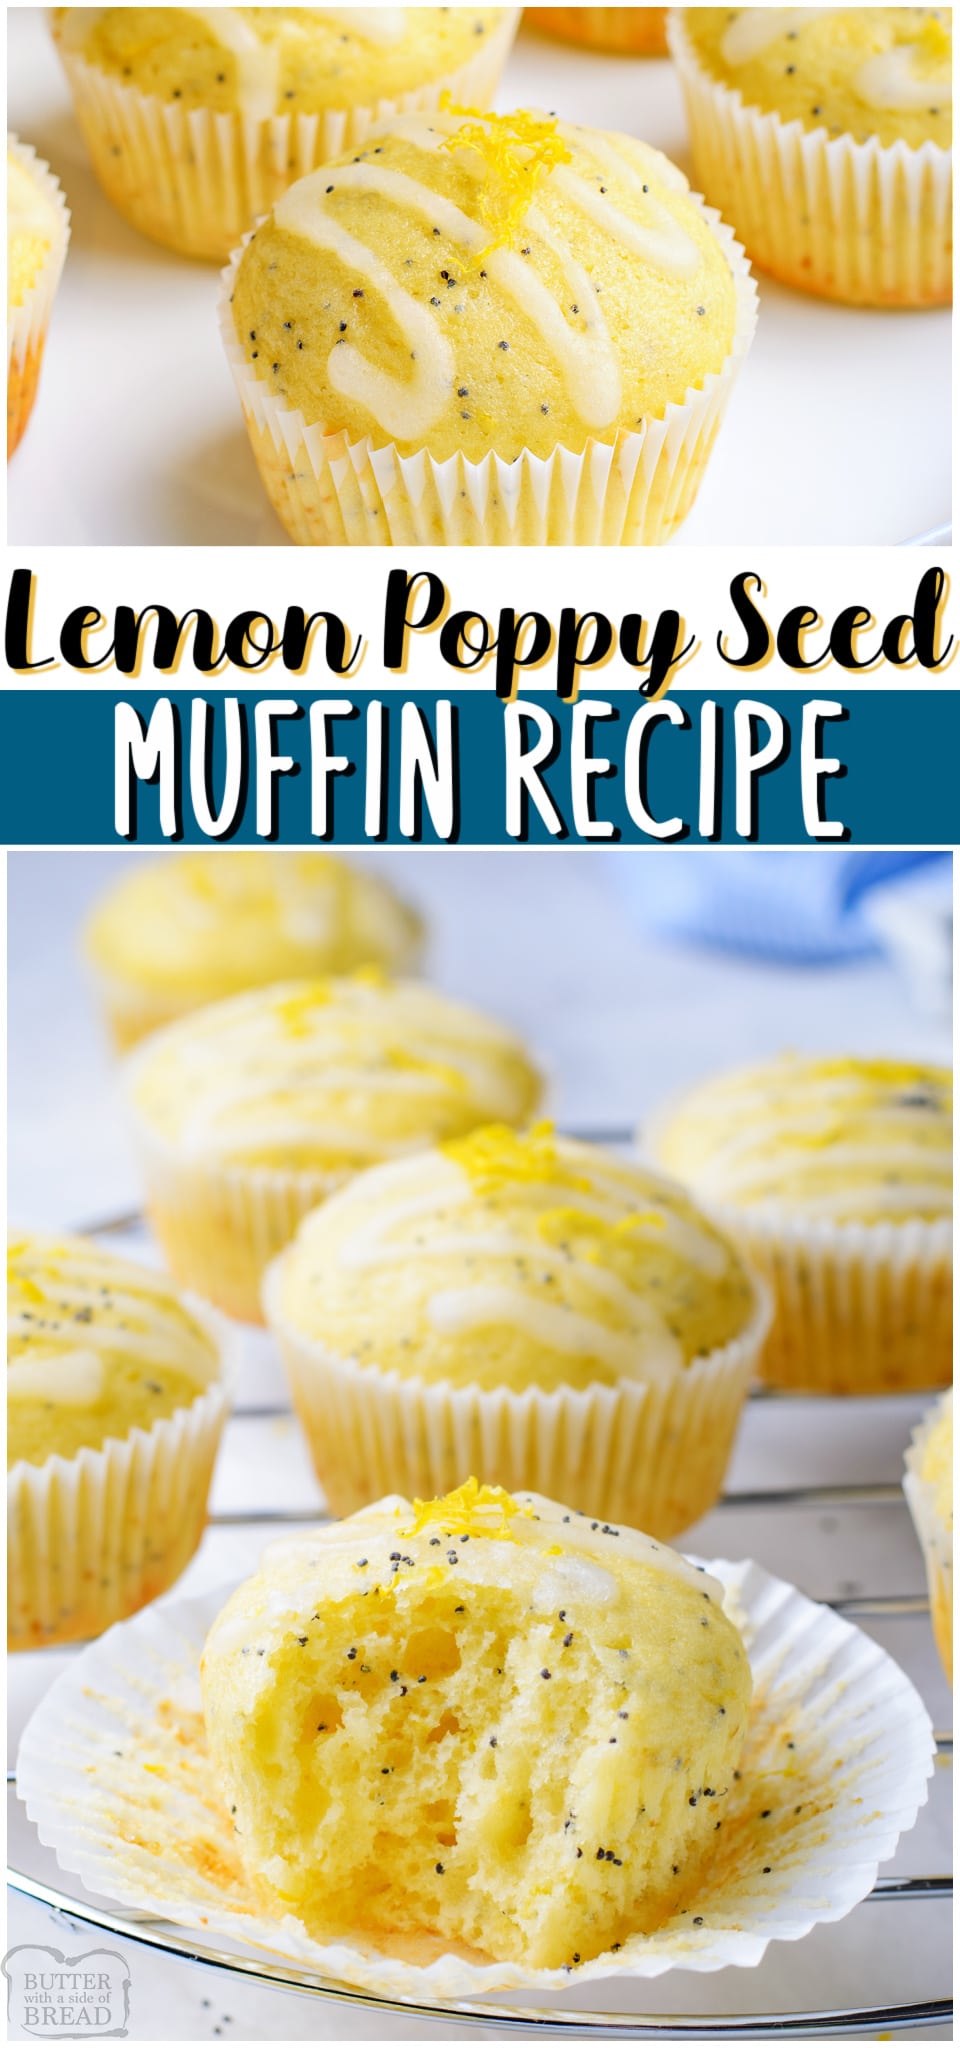 Lemon Poppy Seed Muffins made with traditional ingredients, plus fresh lemon, greek yogurt & poppy seeds! Tender lemon muffins with bright flavor & drizzled with a tangy sweet lemon glaze.